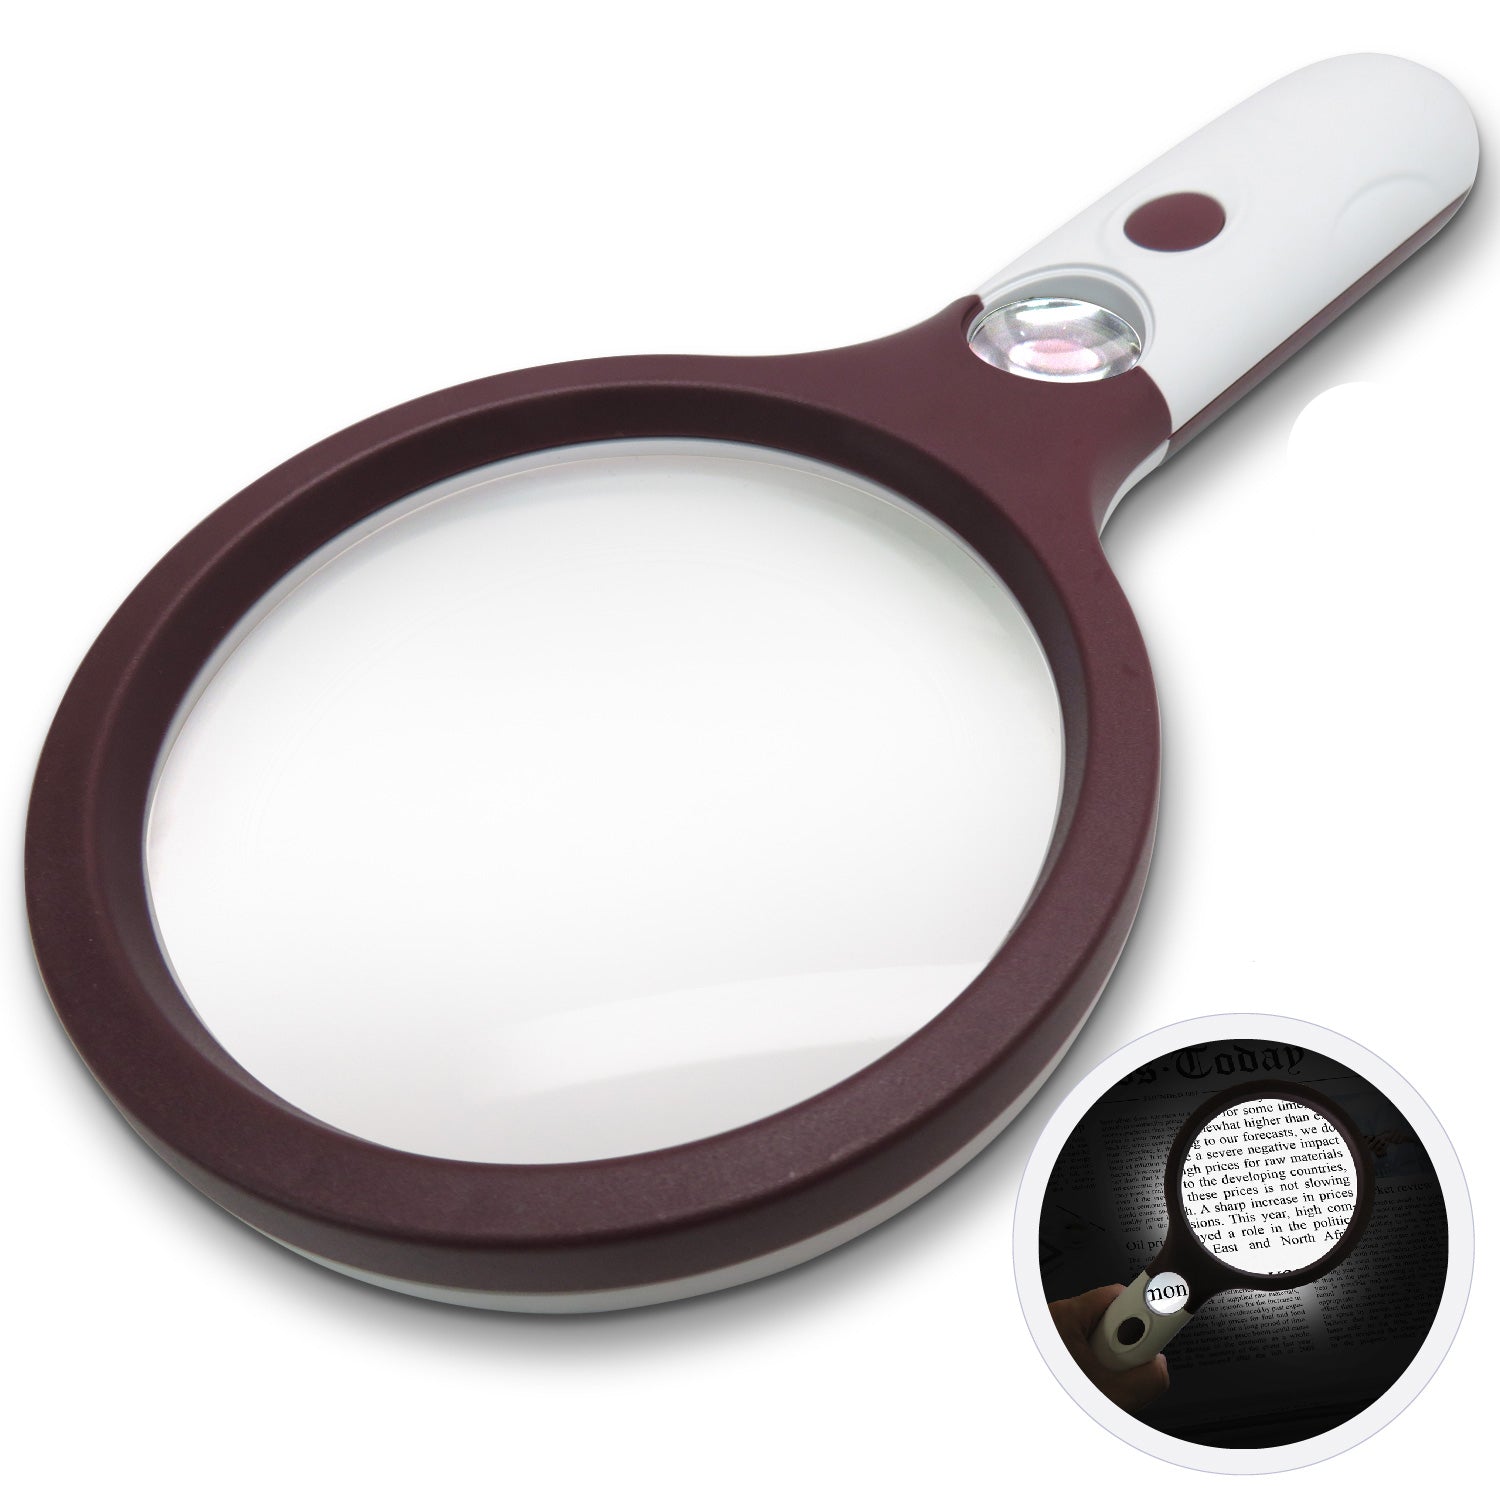 Magnipros 5X Large LED Full Page Magnifying Glass with Detachable Hands-Free Stand & 3 Color Lighting Modes to Reduce Eye Strain, Ideal for Reading